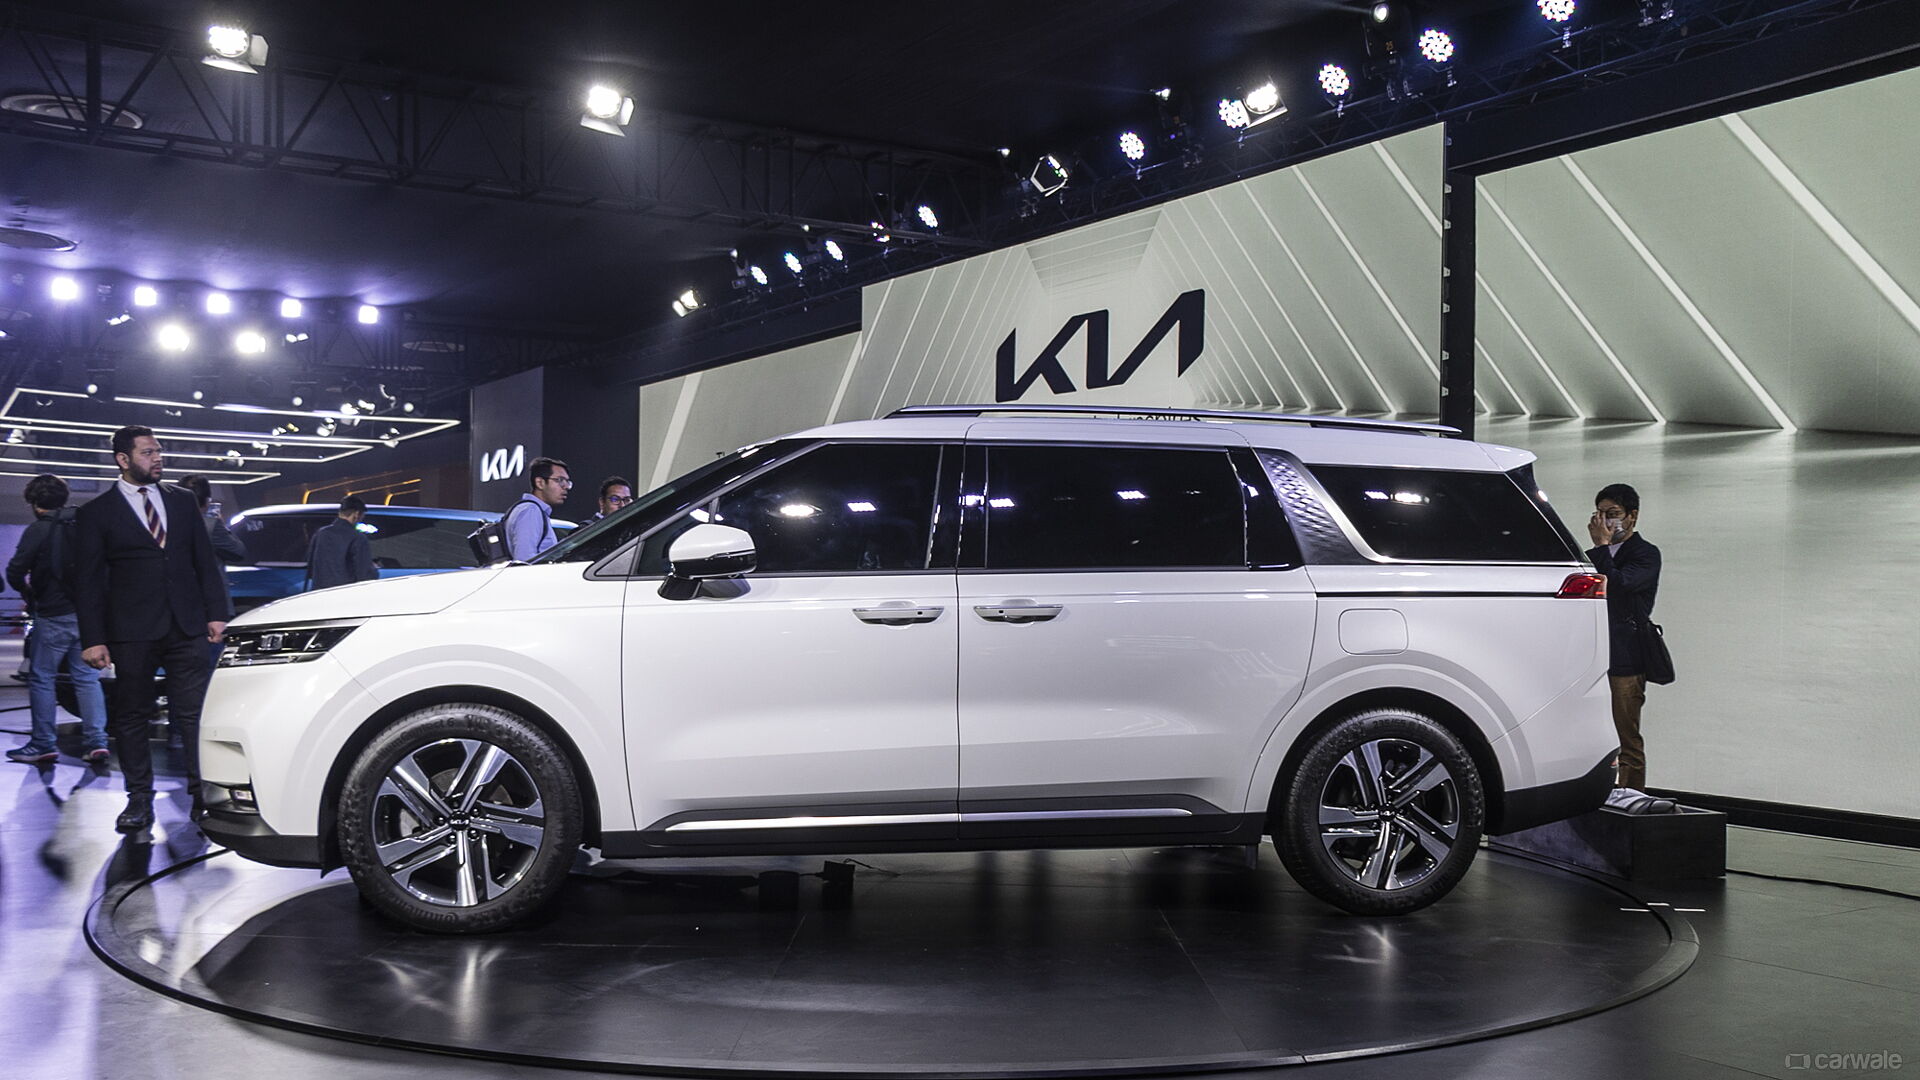 Kia Carnival Expected Price ₹ 40 Lakh, 2024 Launch Date, Bookings